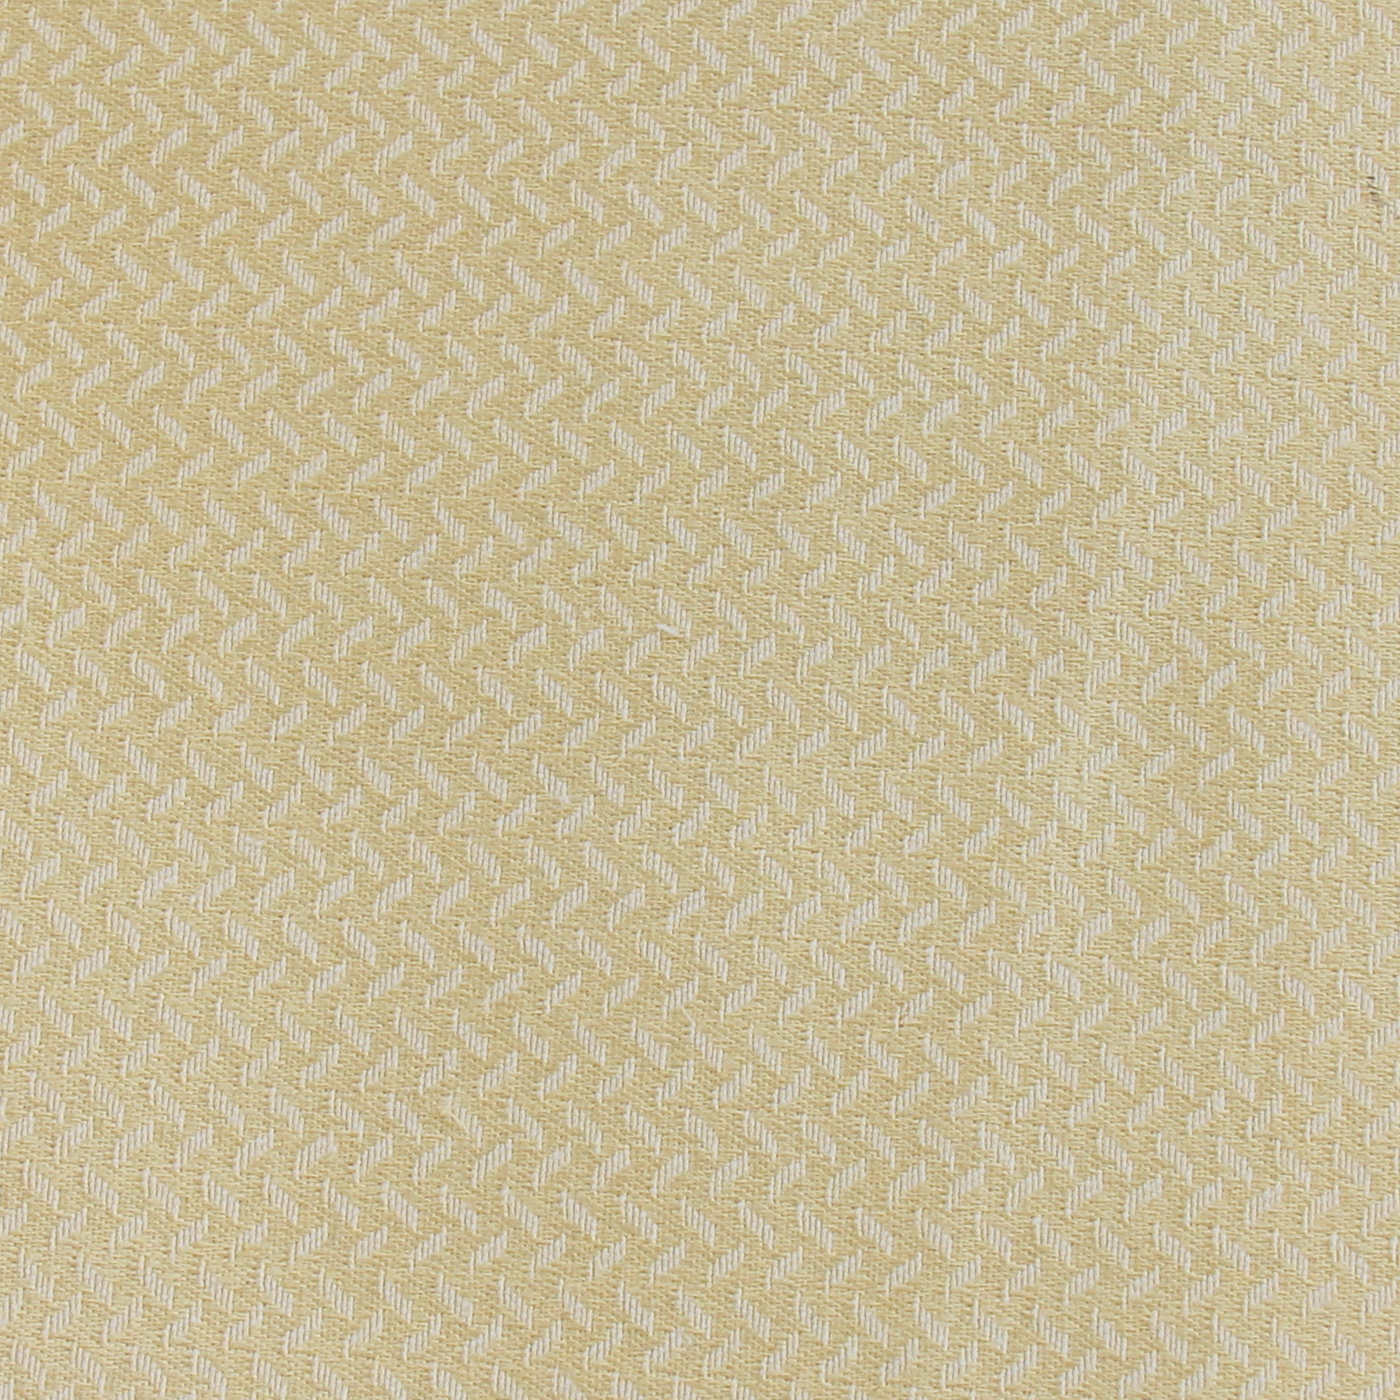 NO 32-45 RS X1 NO 36 Fabric Upholstery Sample